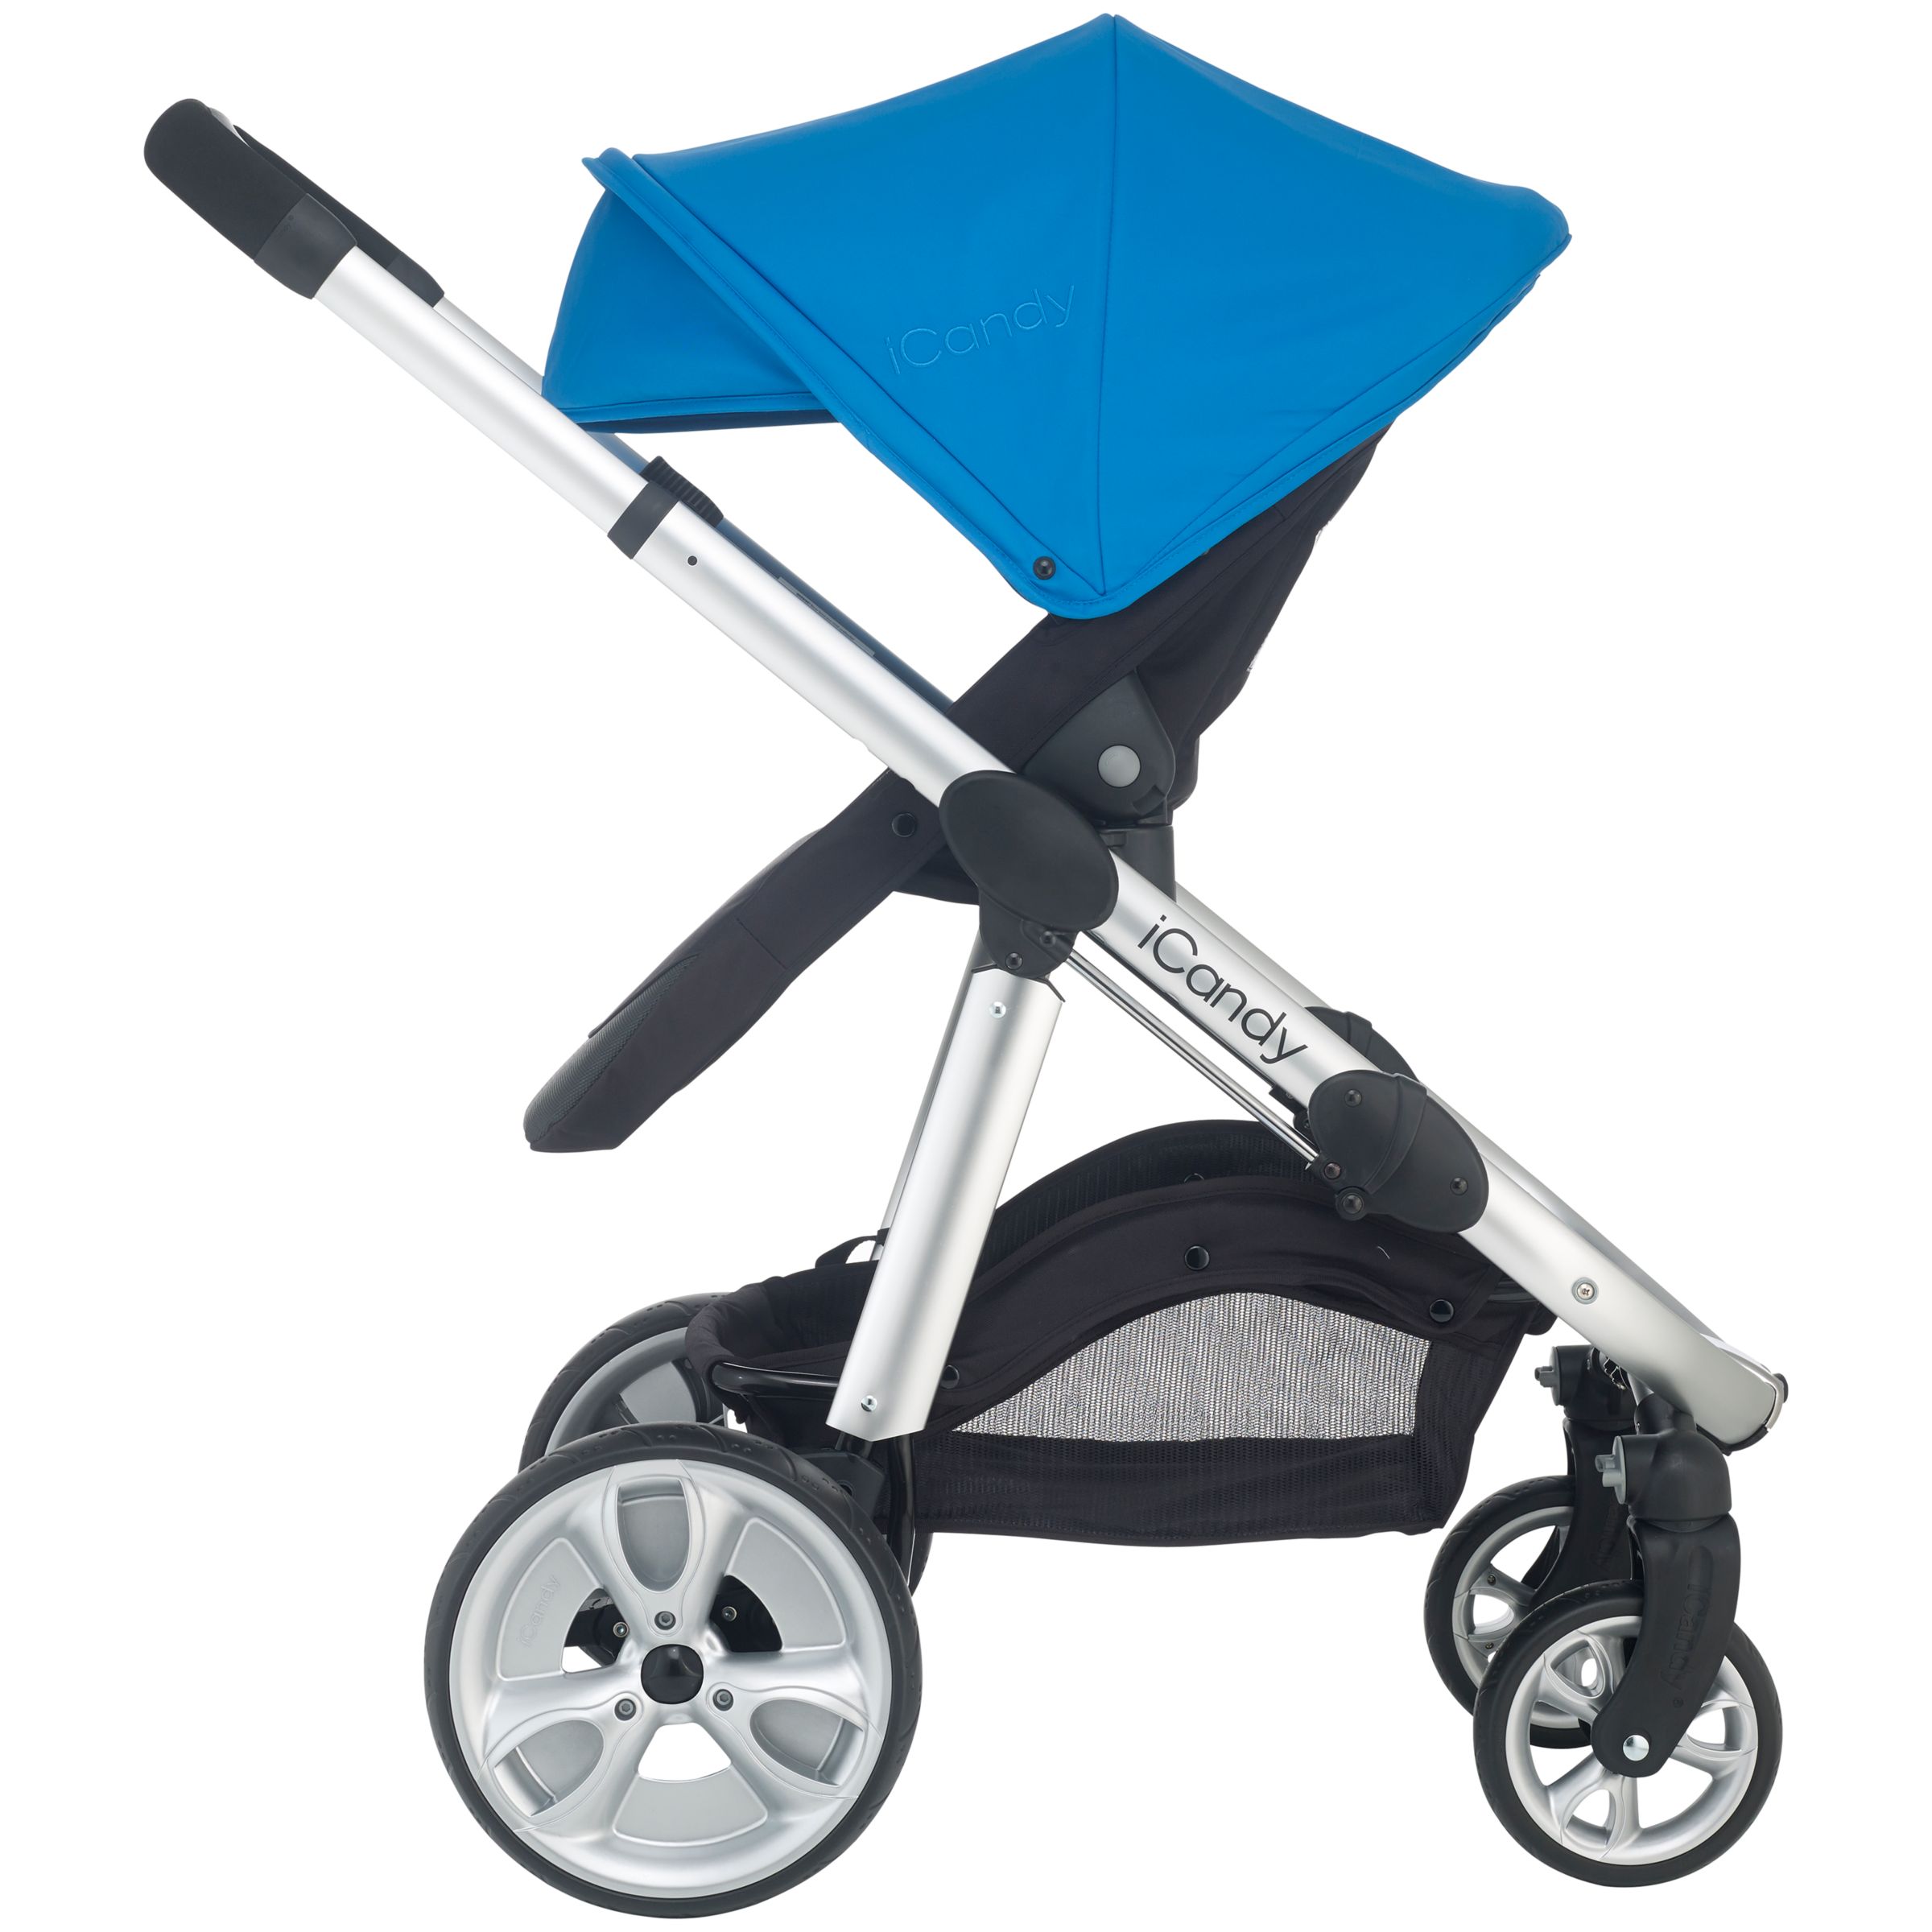 icandy apple to pear carrycot